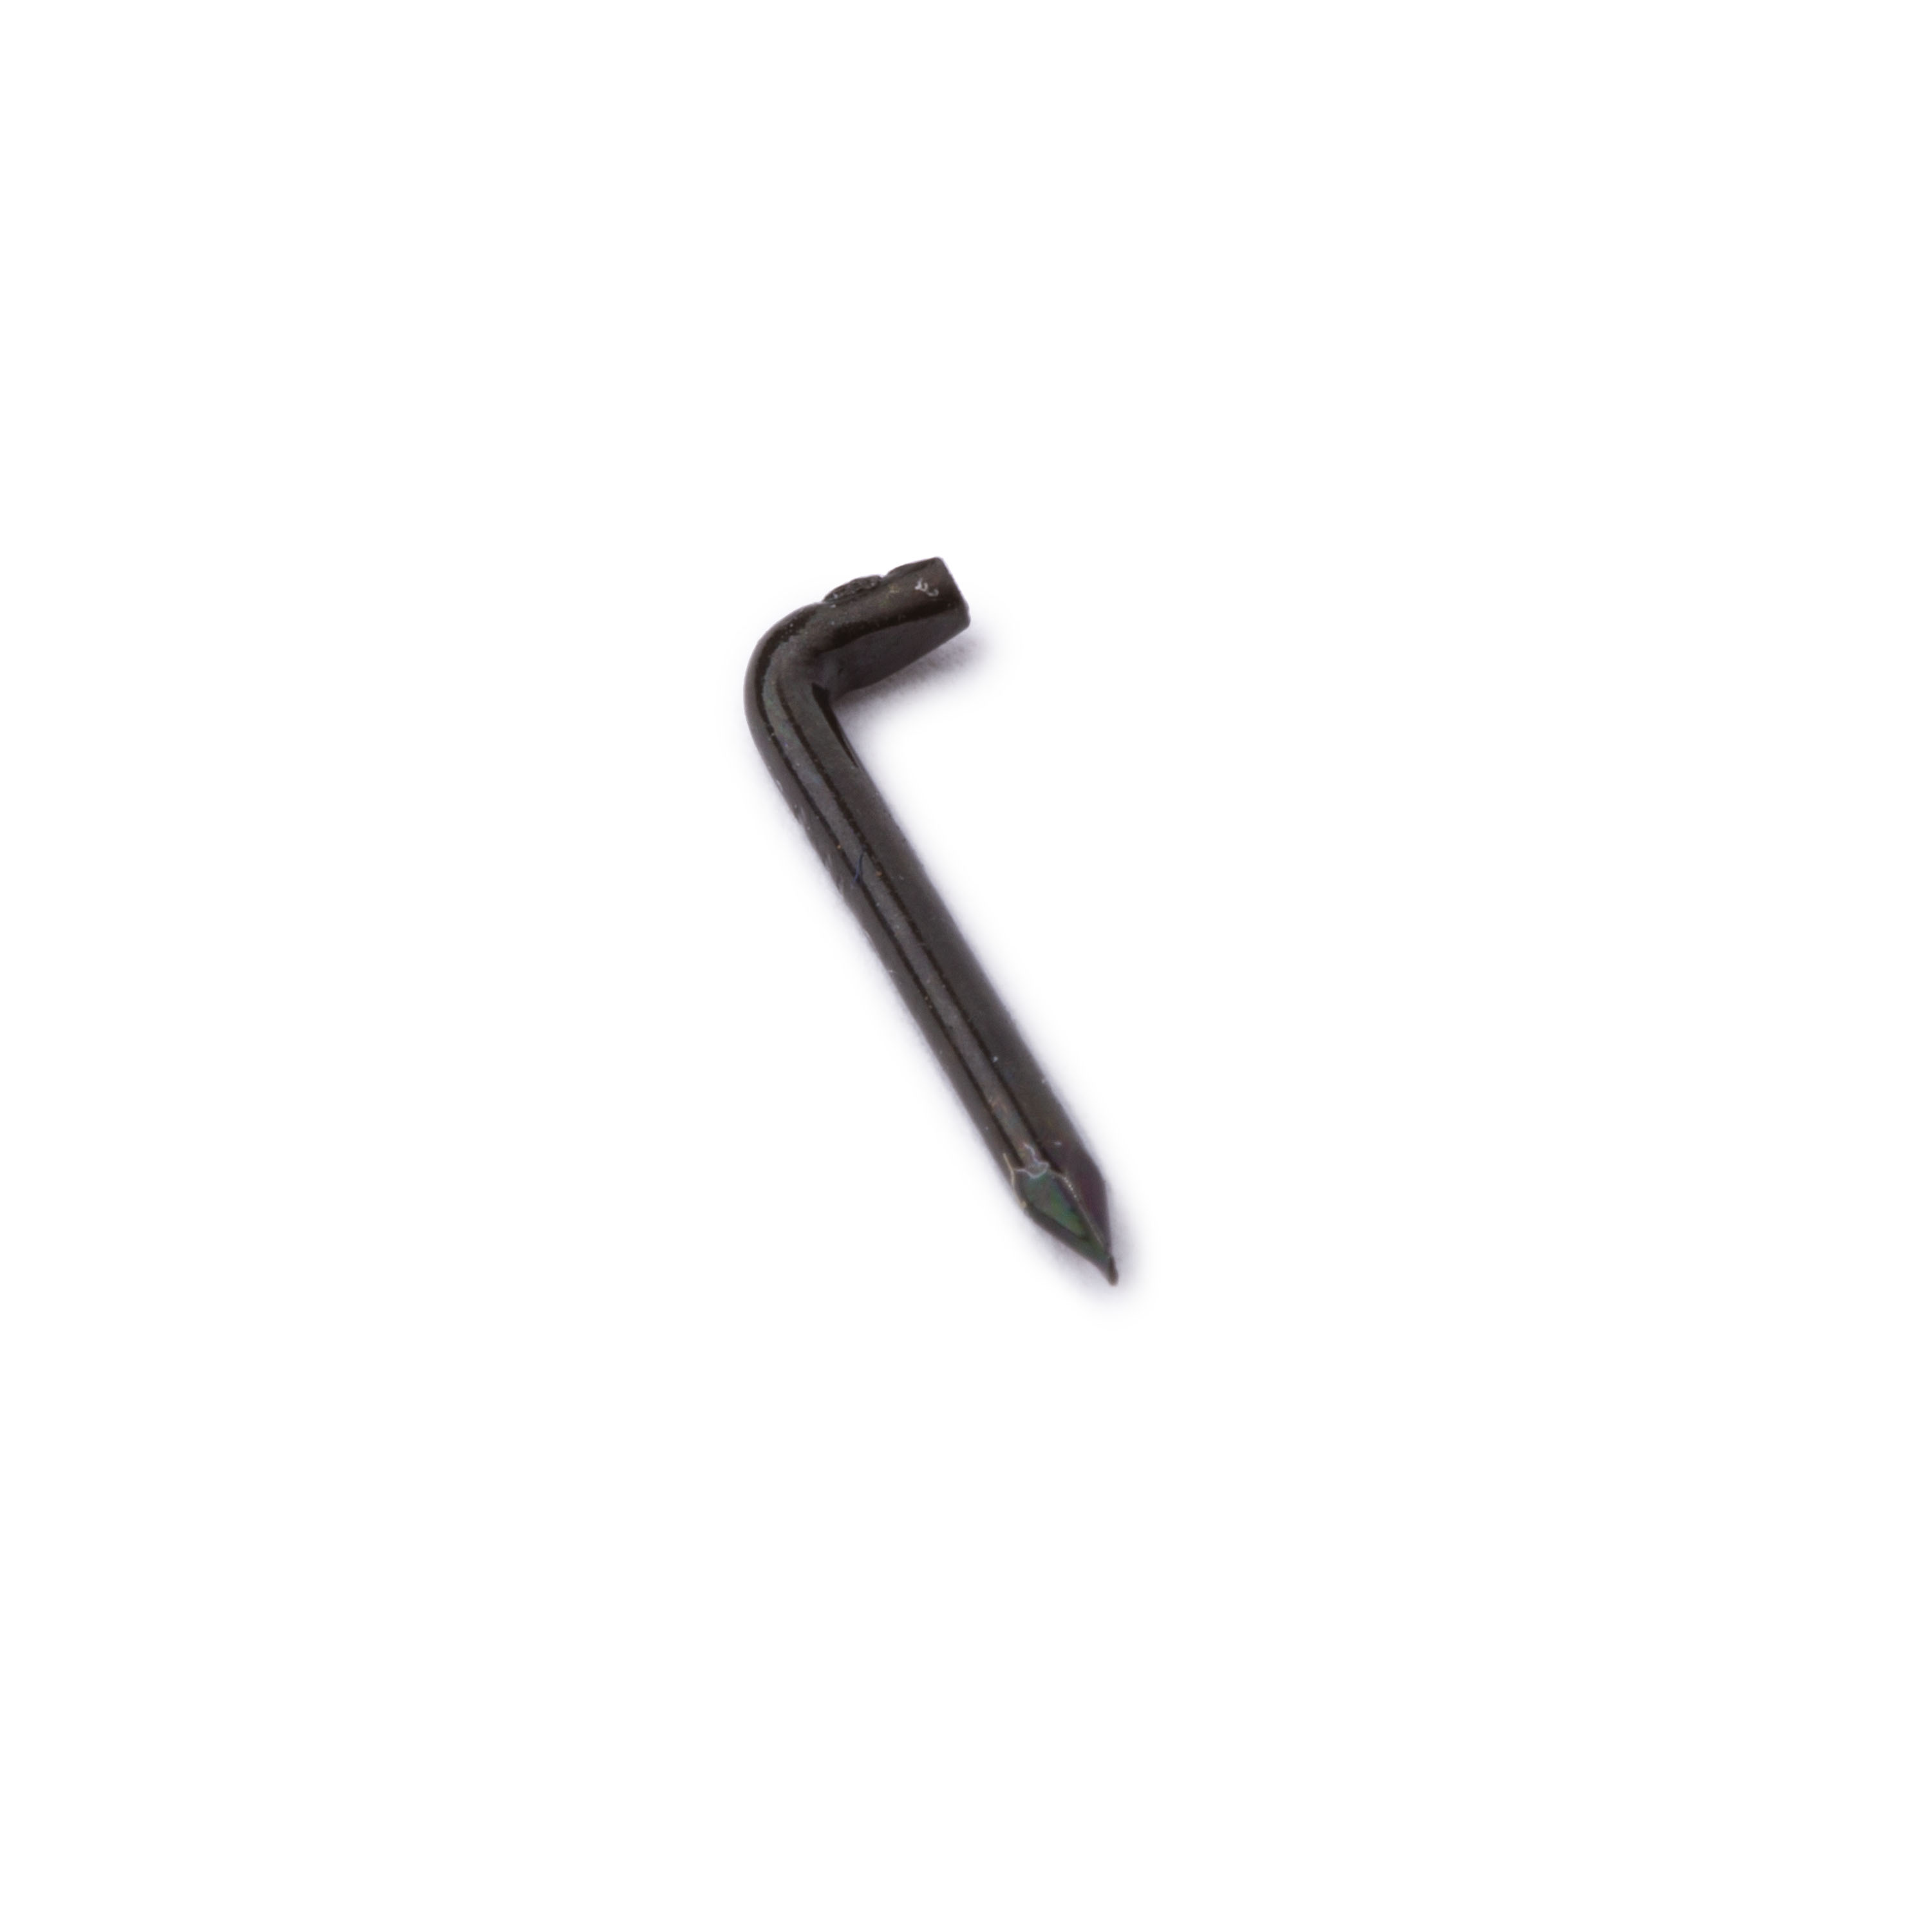 5th String Capo Spikes, Package of 15